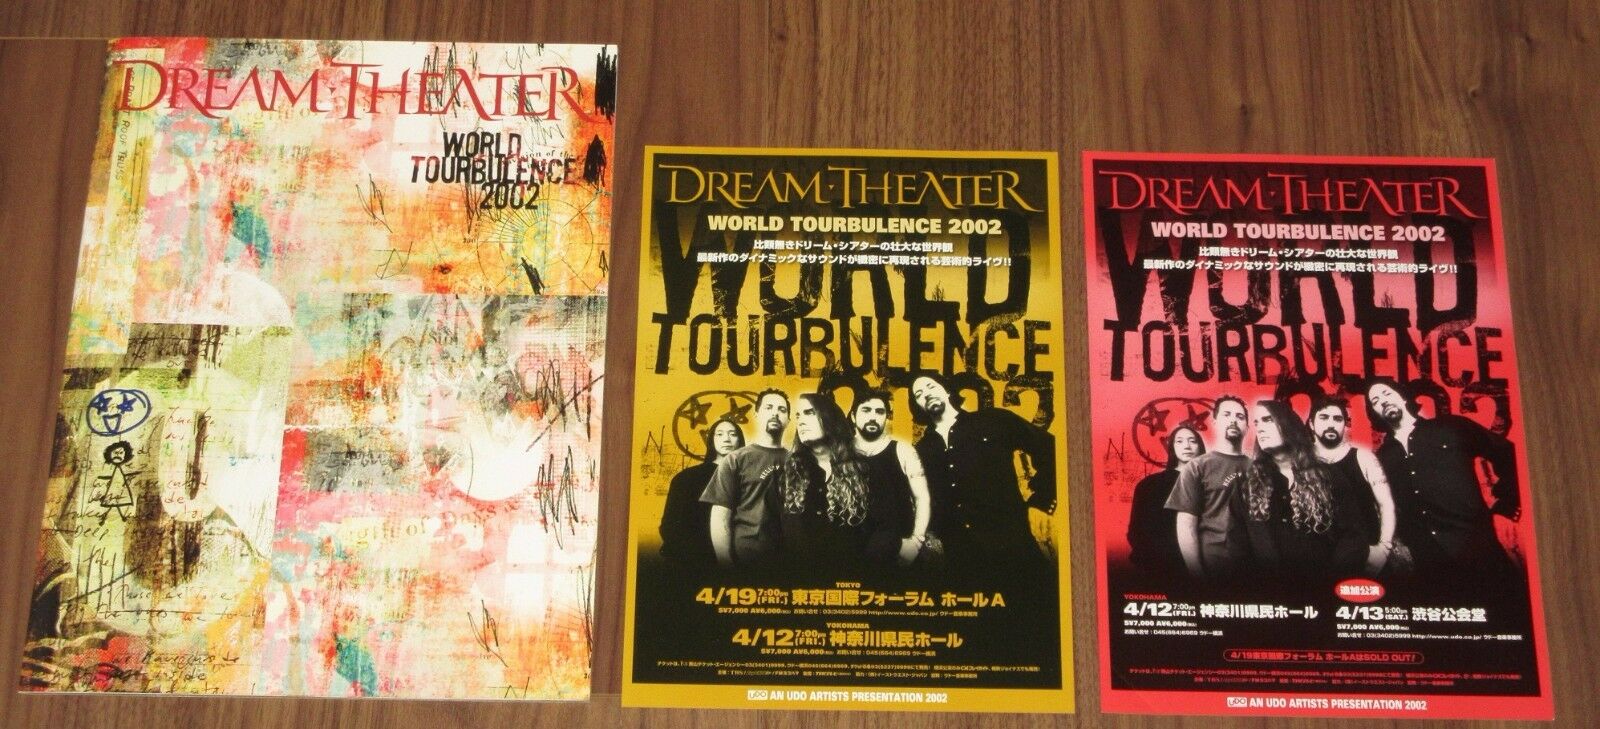 With 2 Promo Flyers! Dream Theater Japan Tour Book - 2002 John Petrucci - Others